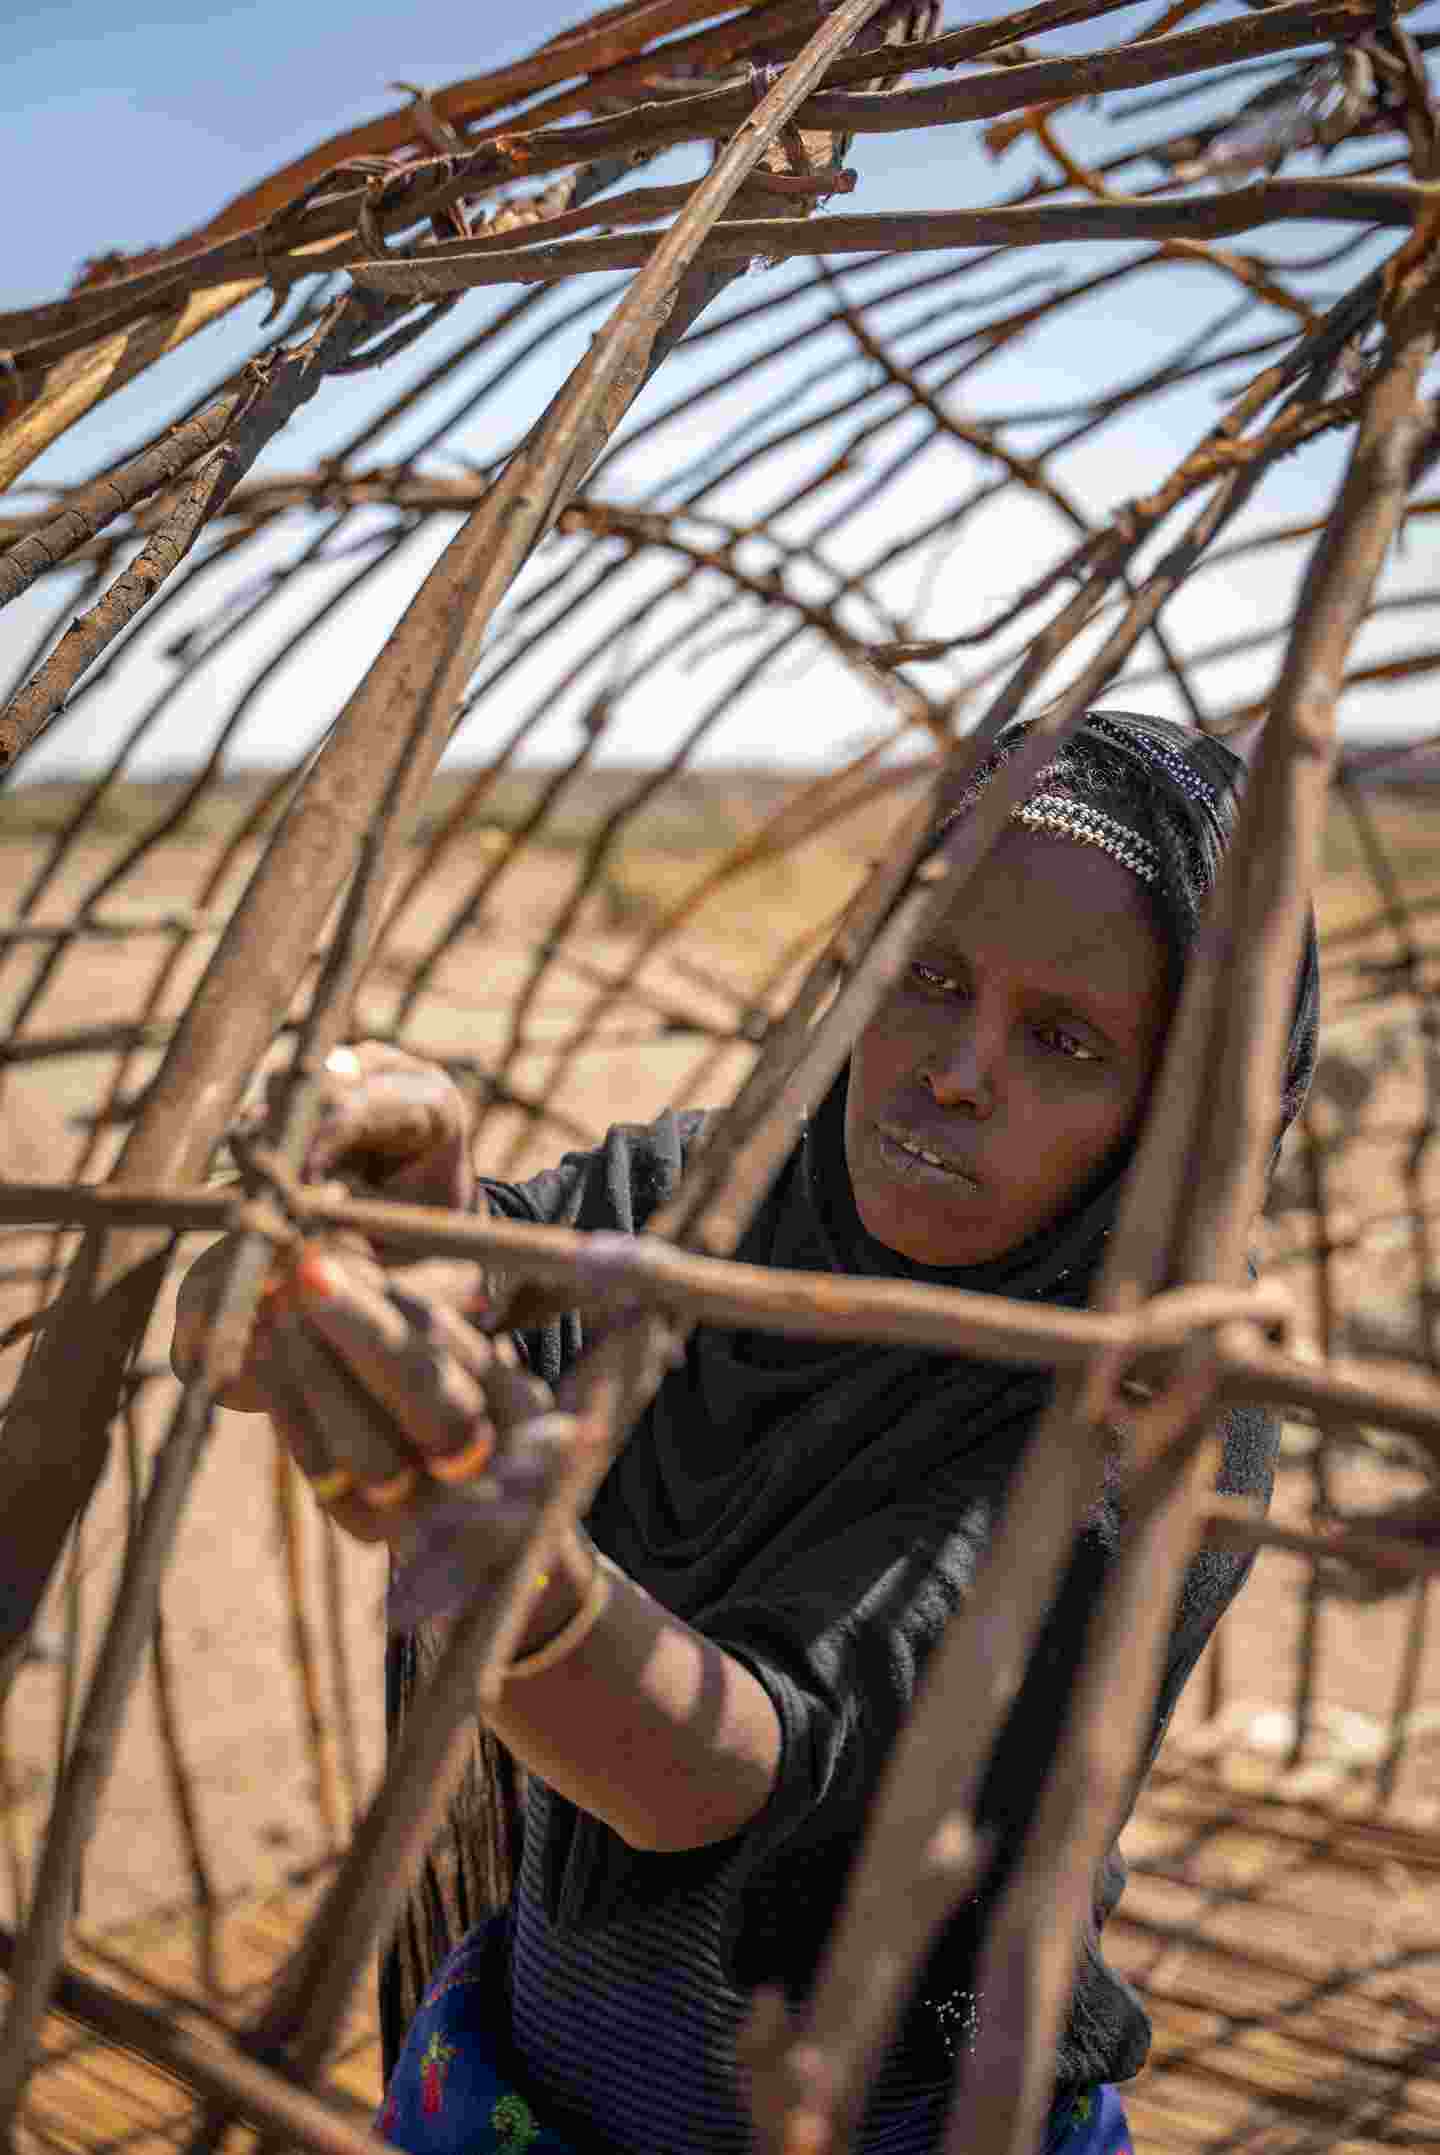 A woman fixing the wooden structure of her house.